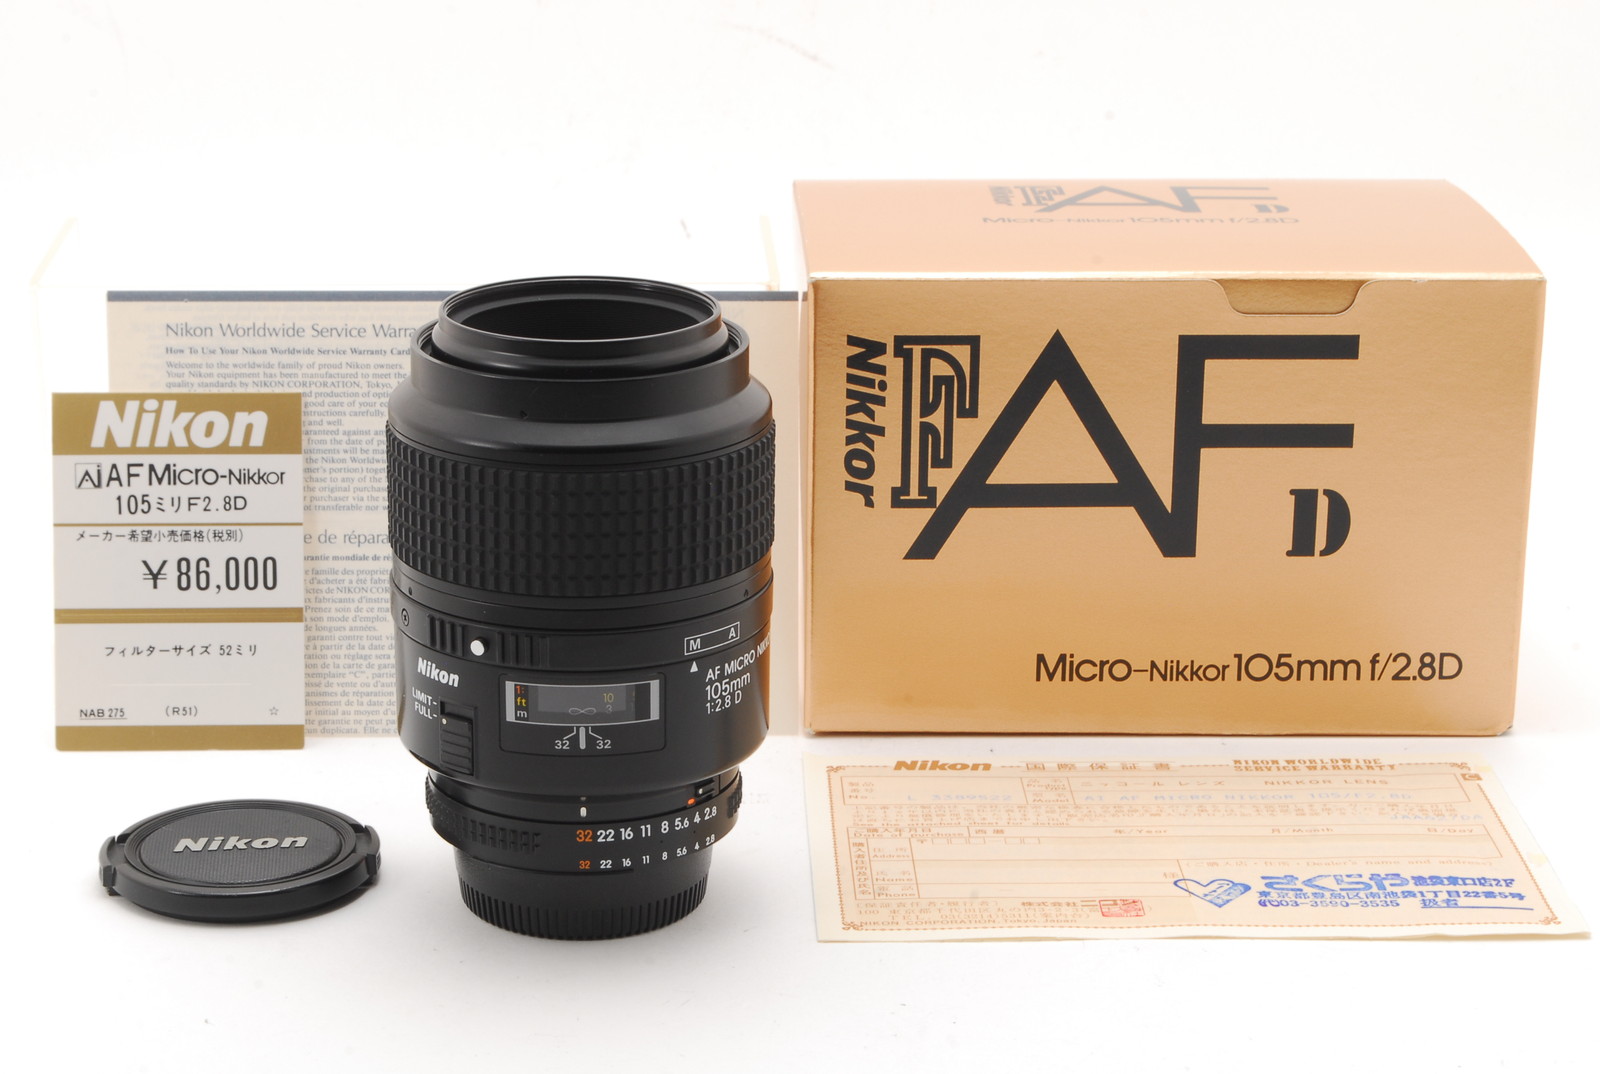 PROMOTION. NEAR MINT Nikon AF MICRO NIKKOR 105mm f/2.8 D, Box, Front Cap, Rear Cap from Japan